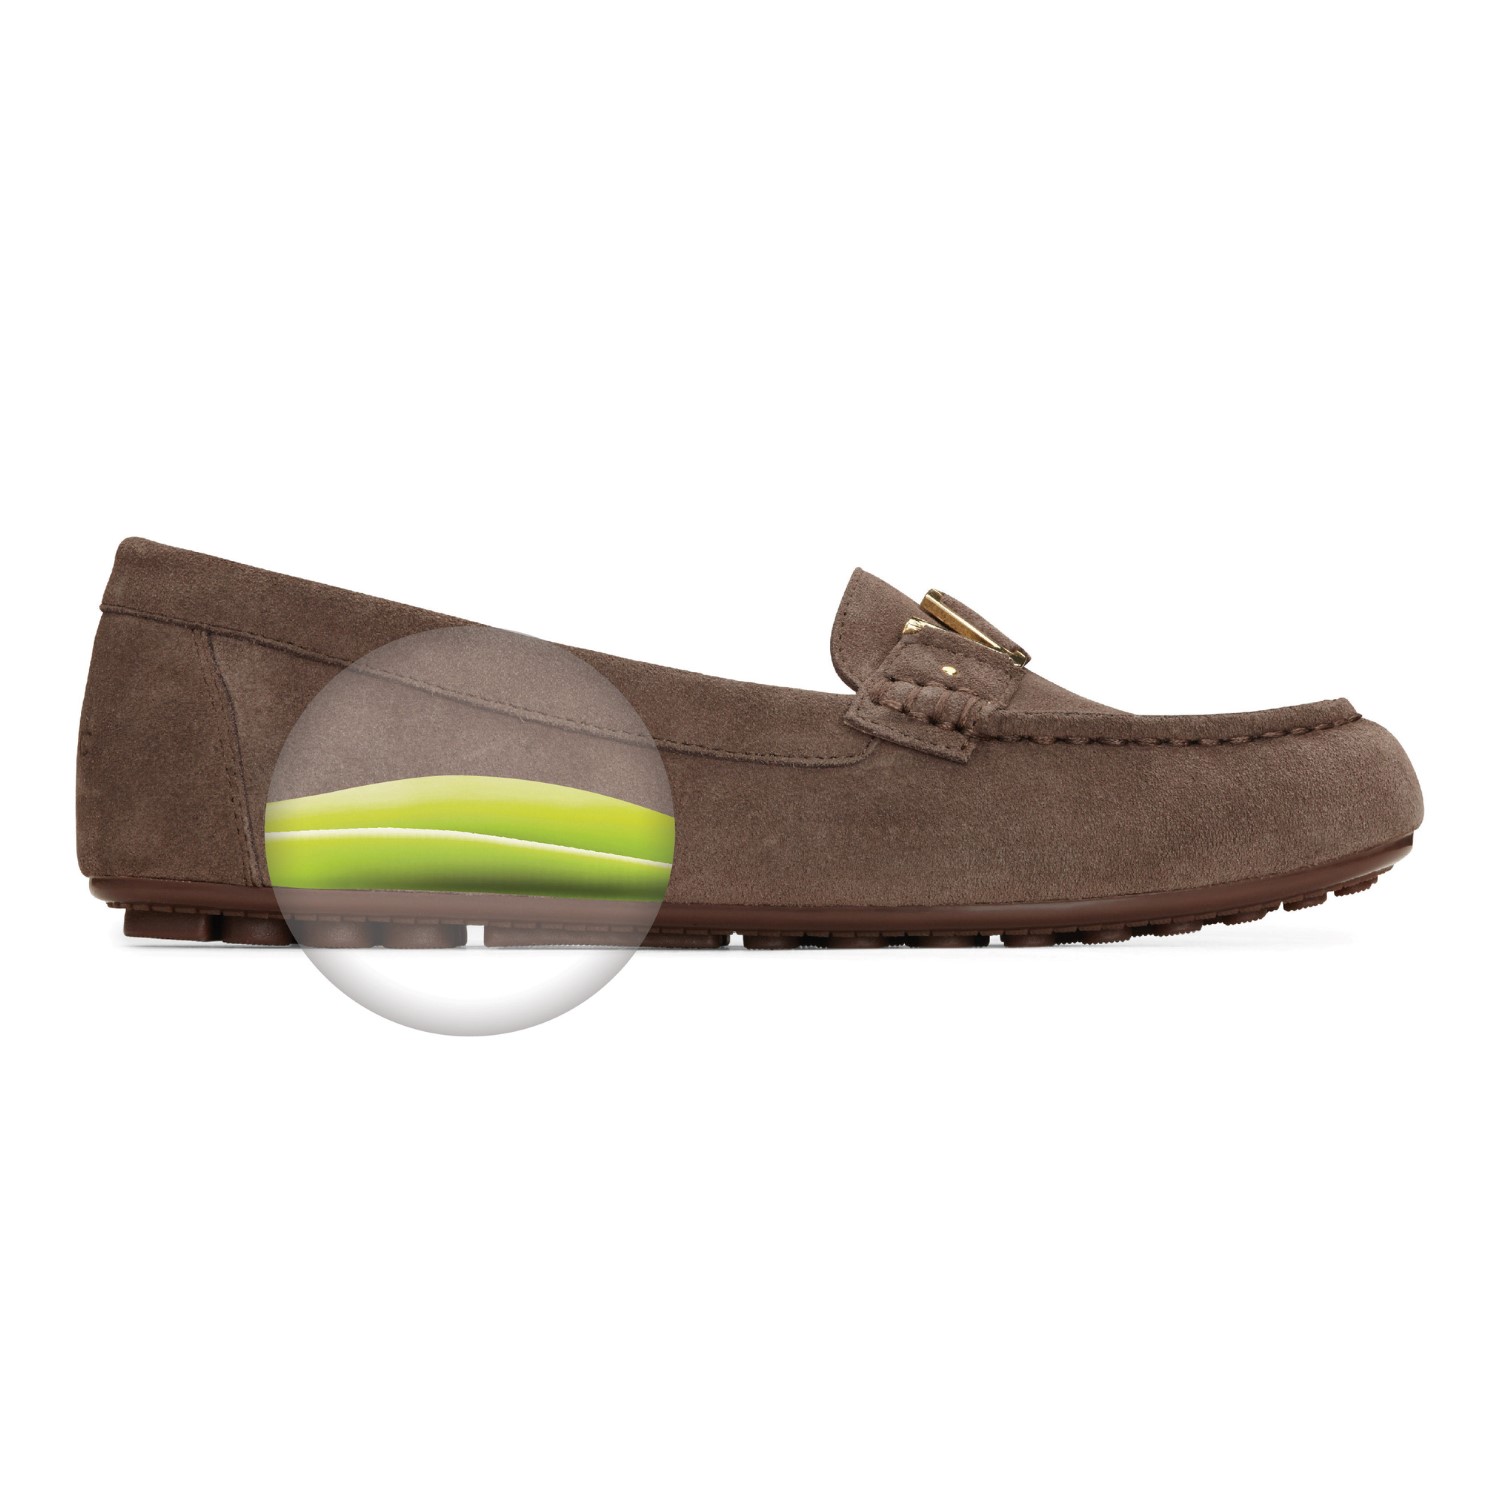 Vionic Hilo Women's Supportive Moccasin